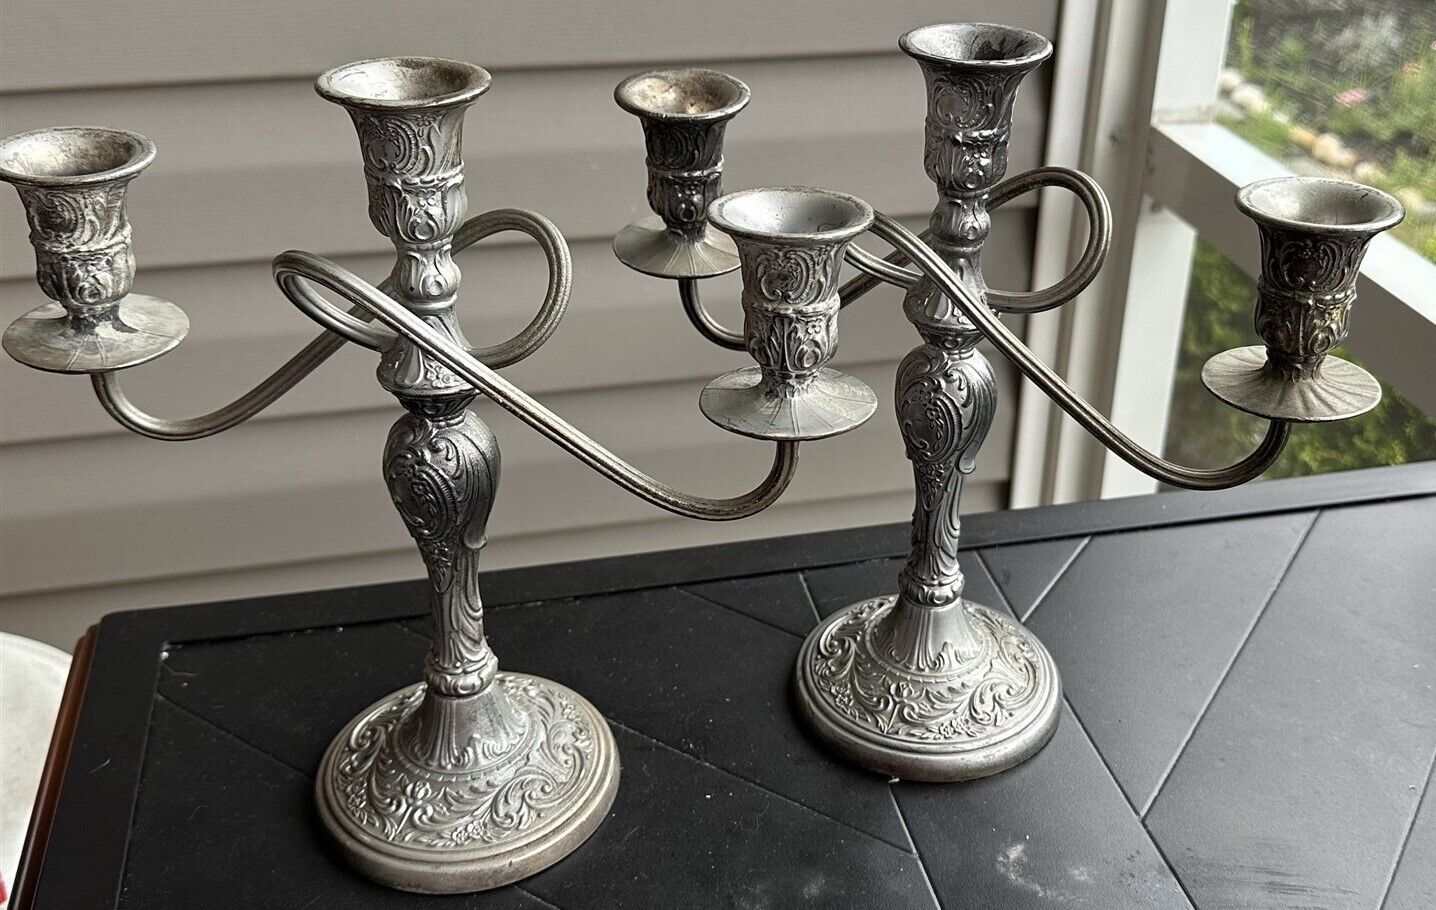  Vintage Wm Rogers VICTORIAN ROSE Silver Plate Candelabra Candlestick Pair